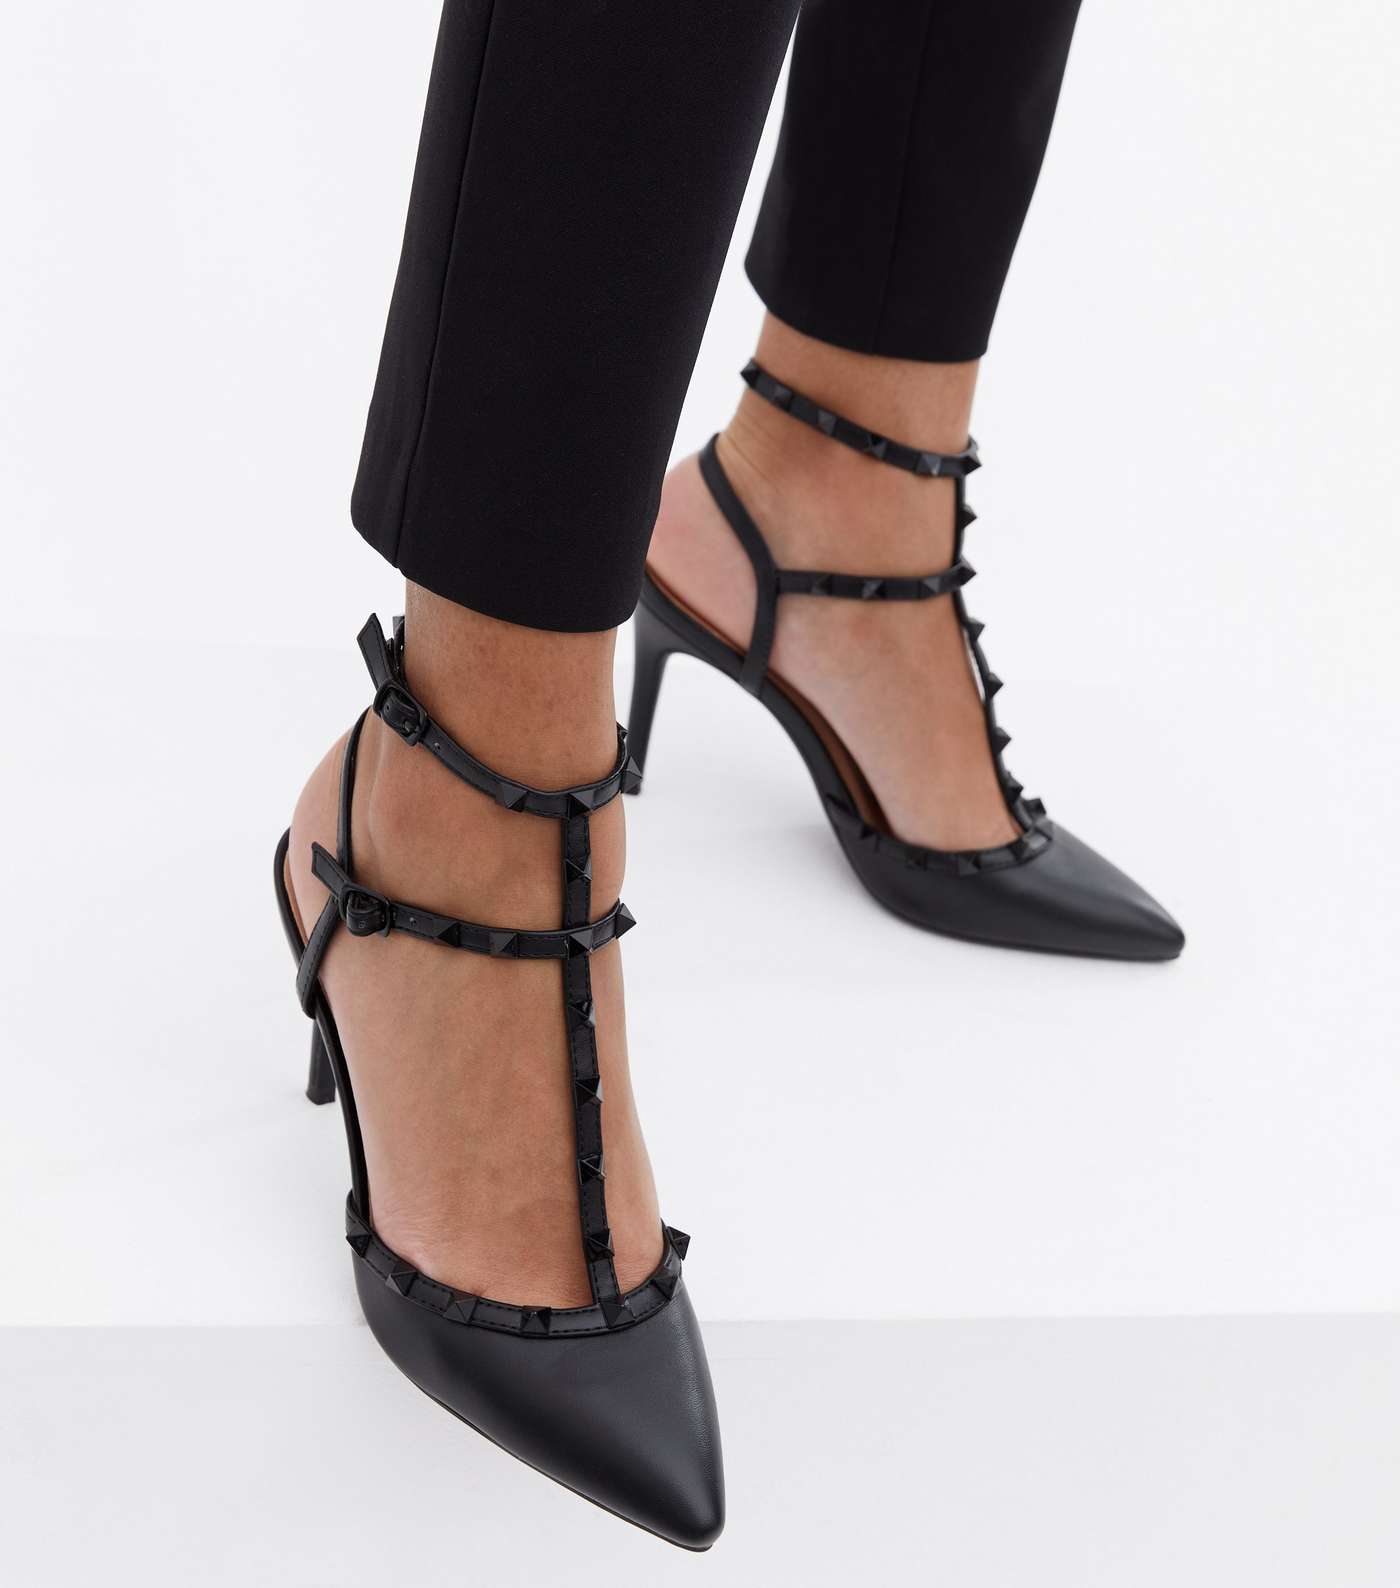 Black Leather-Look Strappy Studded Stiletto Heel Court Shoes Image 2